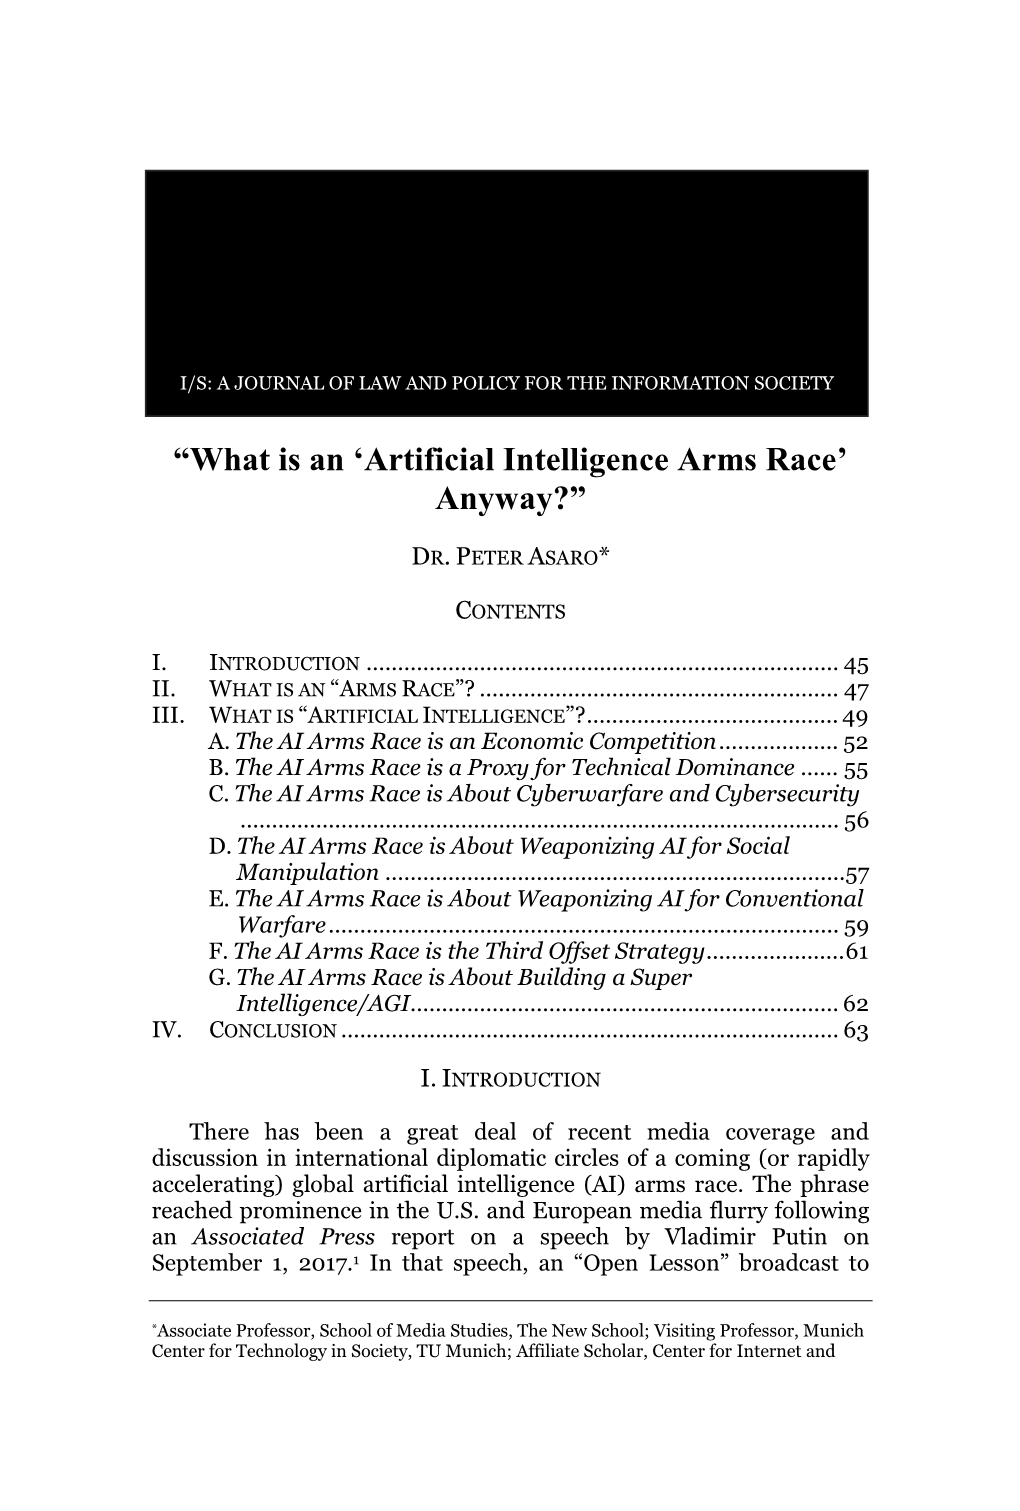 “What Is an 'Artificial Intelligence Arms Race' Anyway?”